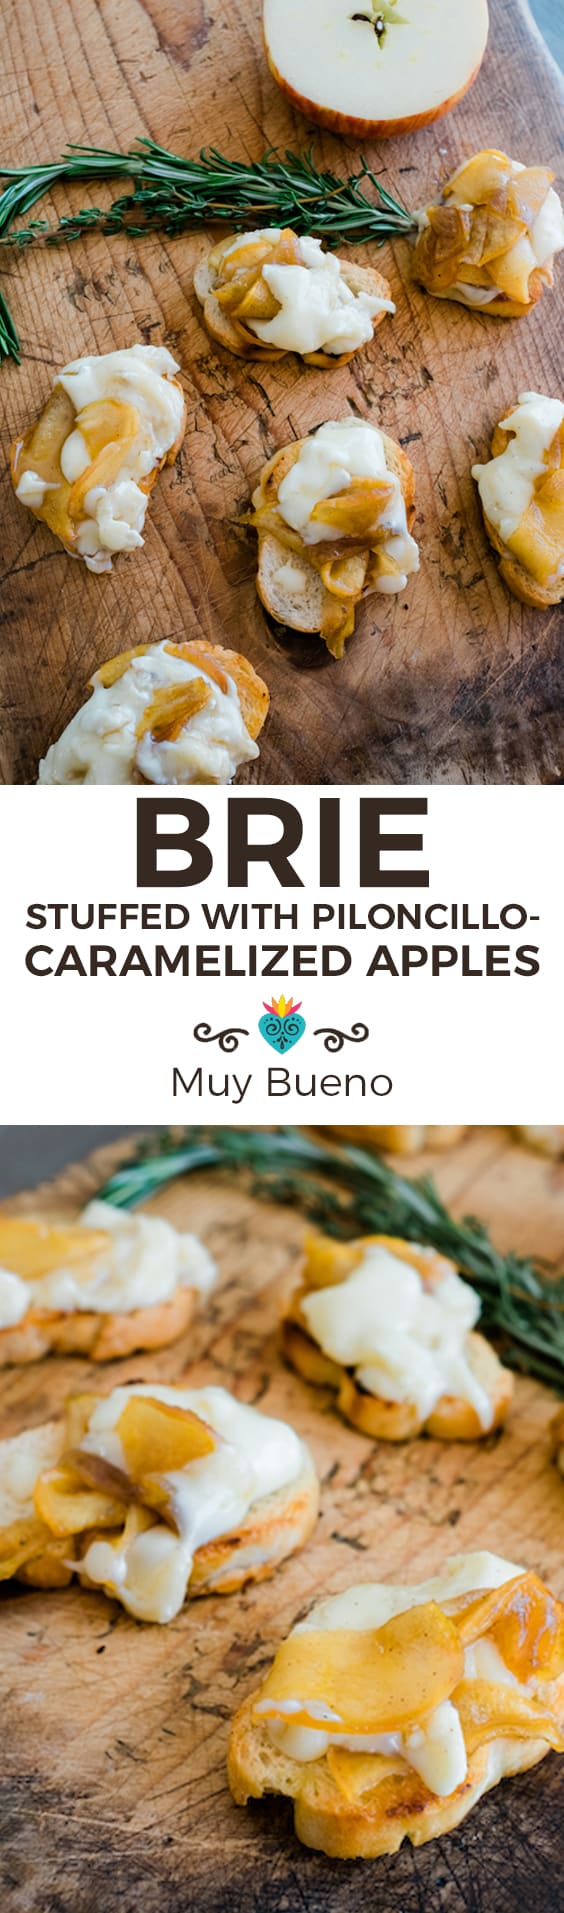 Brie Stuffed with Piloncillo Caramelized Apples Super Long Collage with Text Overlay